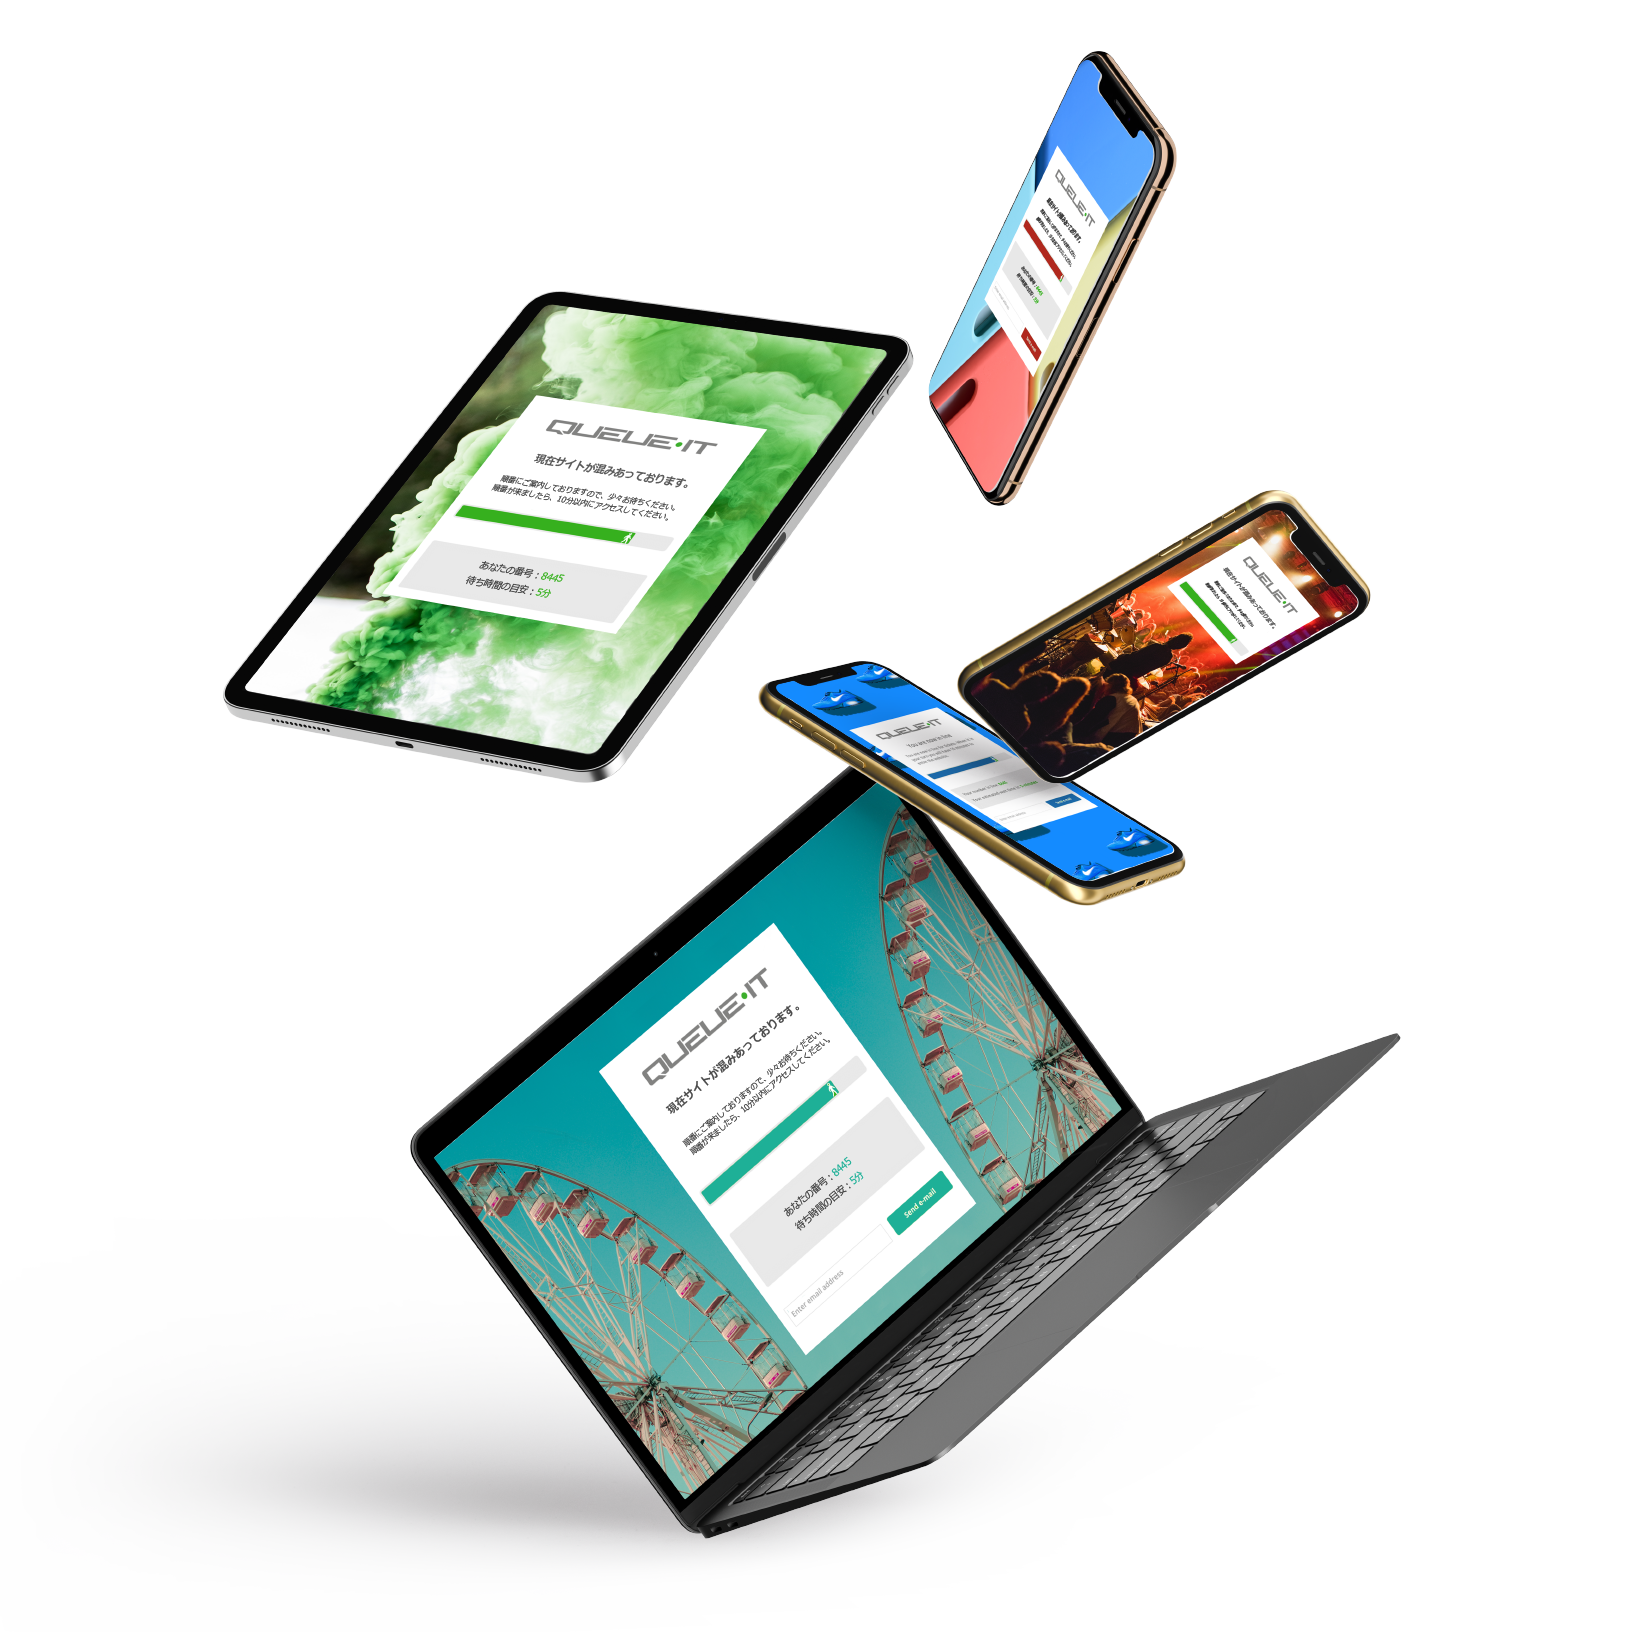 Laptop, tablets & mobile phones with queue pages